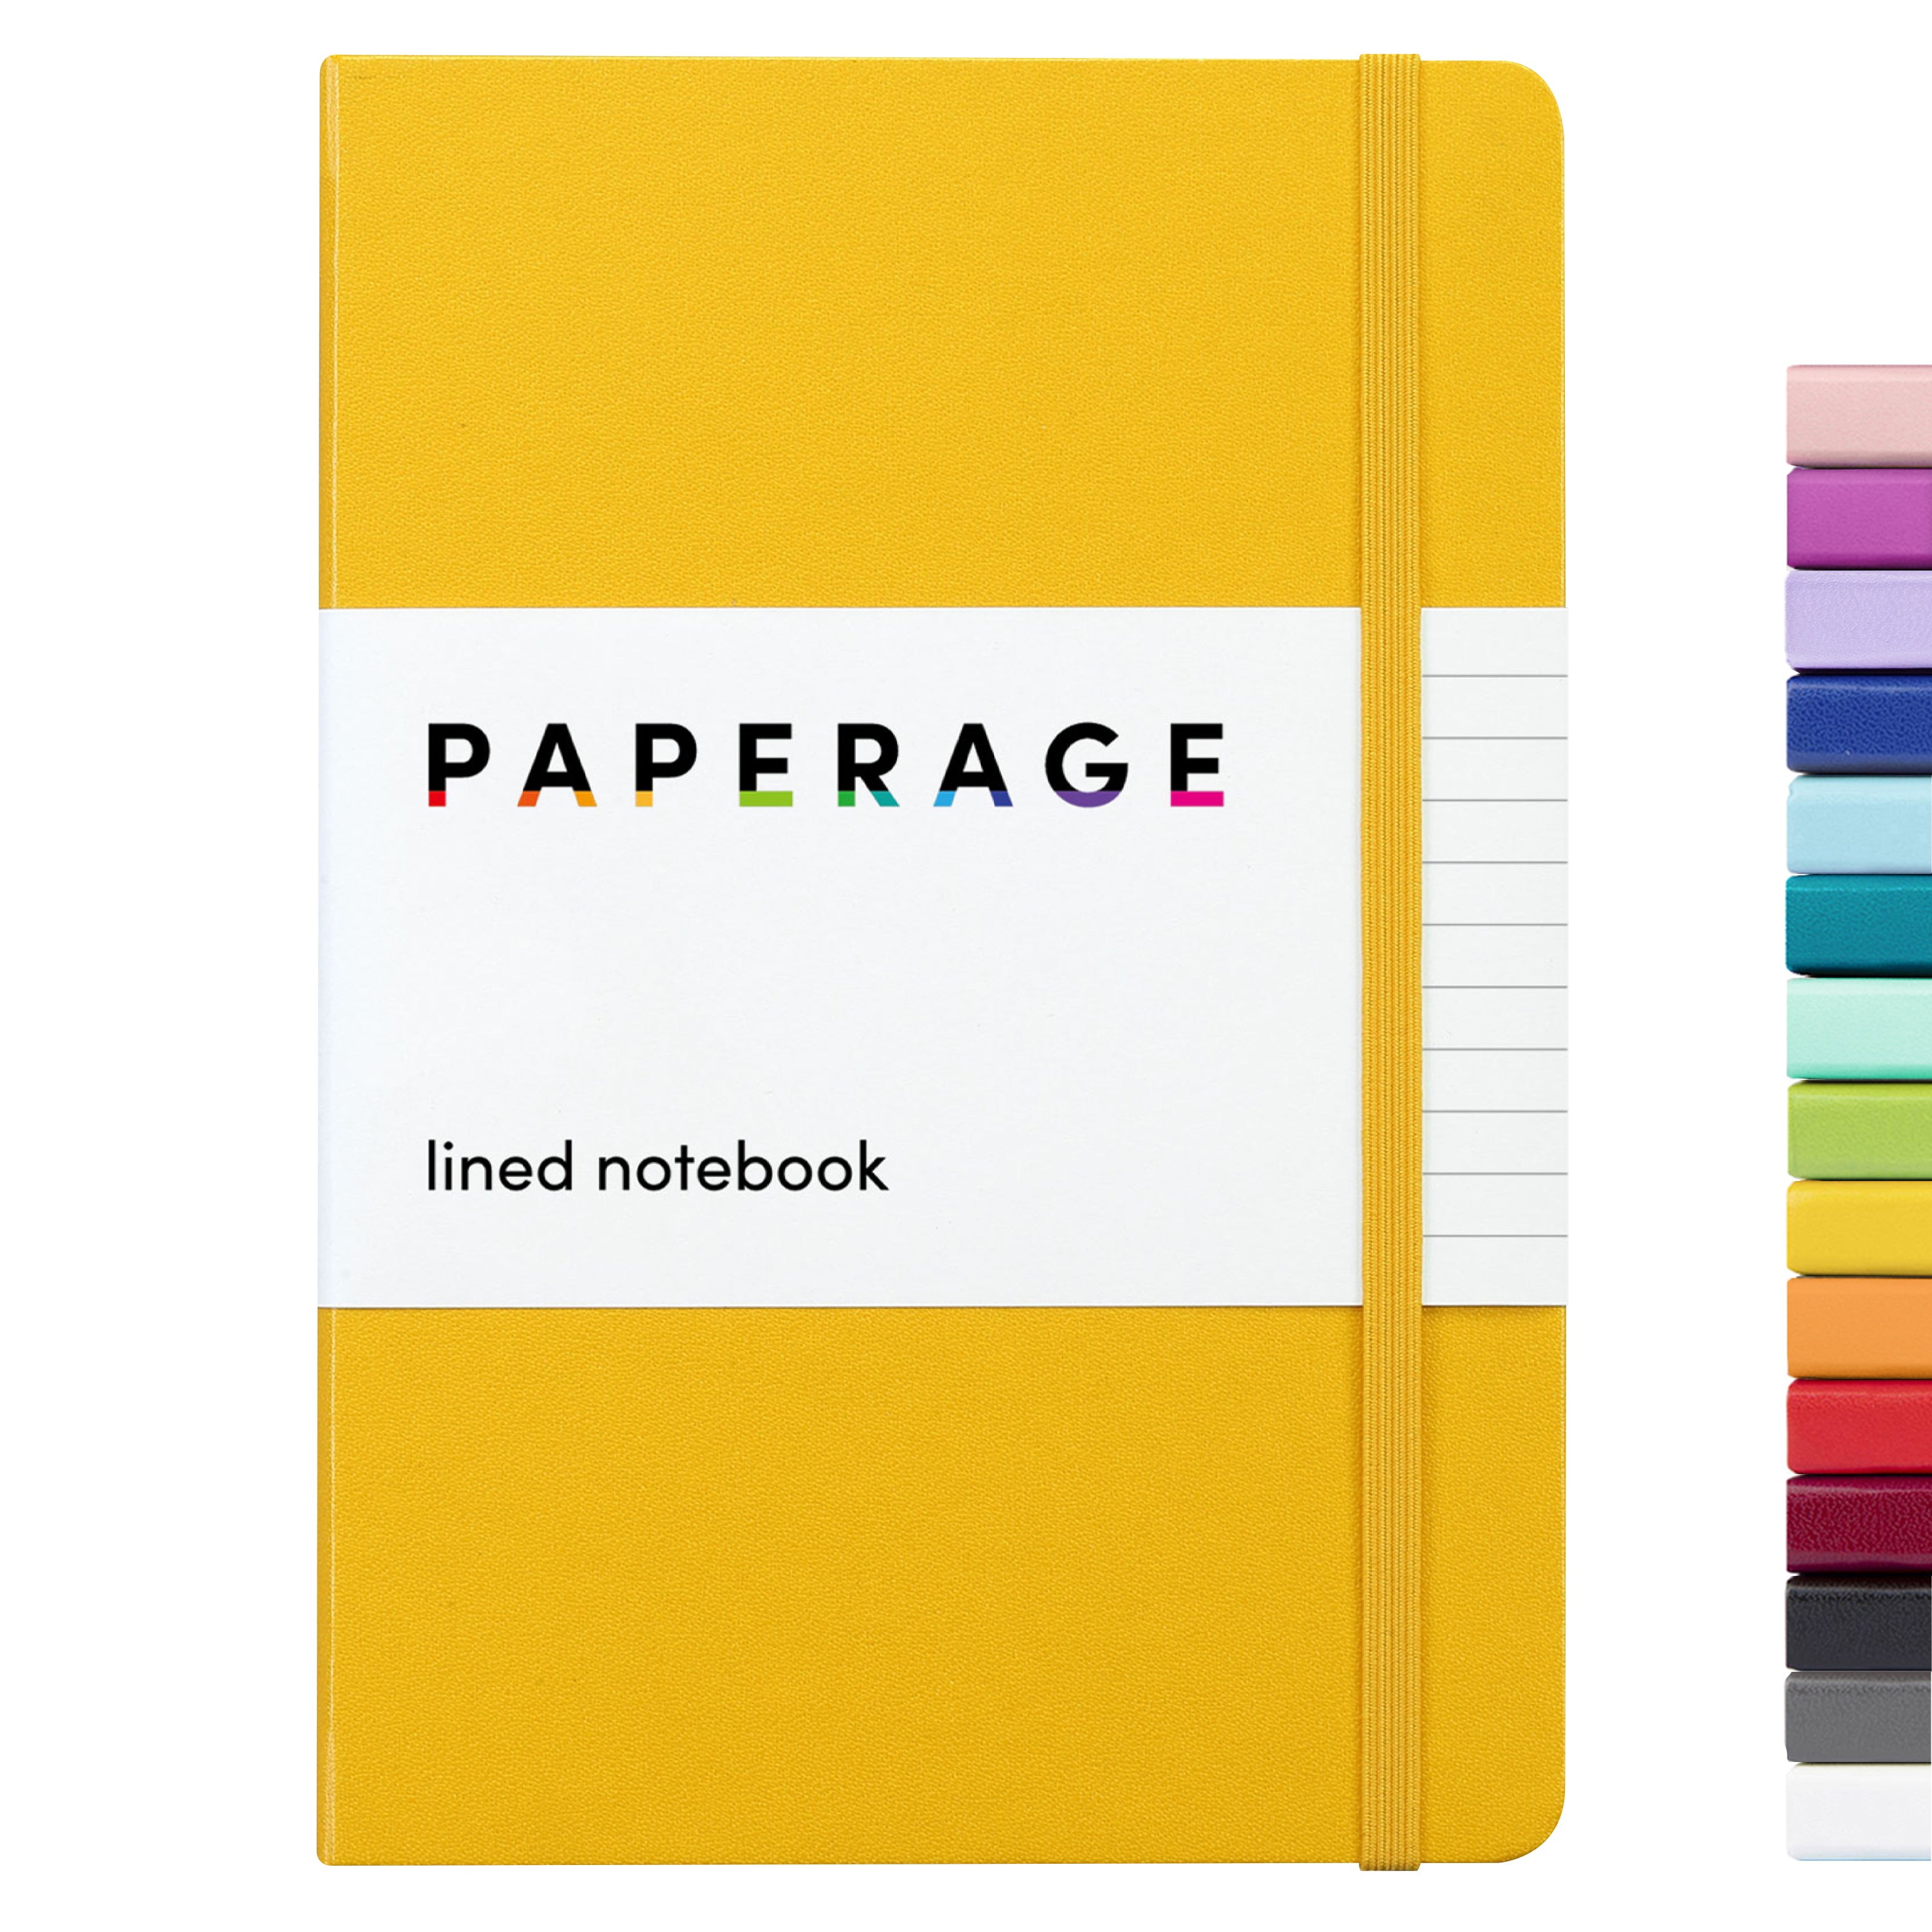 PAPERAGE Lined Journal Notebook Hard Cover 5.7 x 8 Inches White